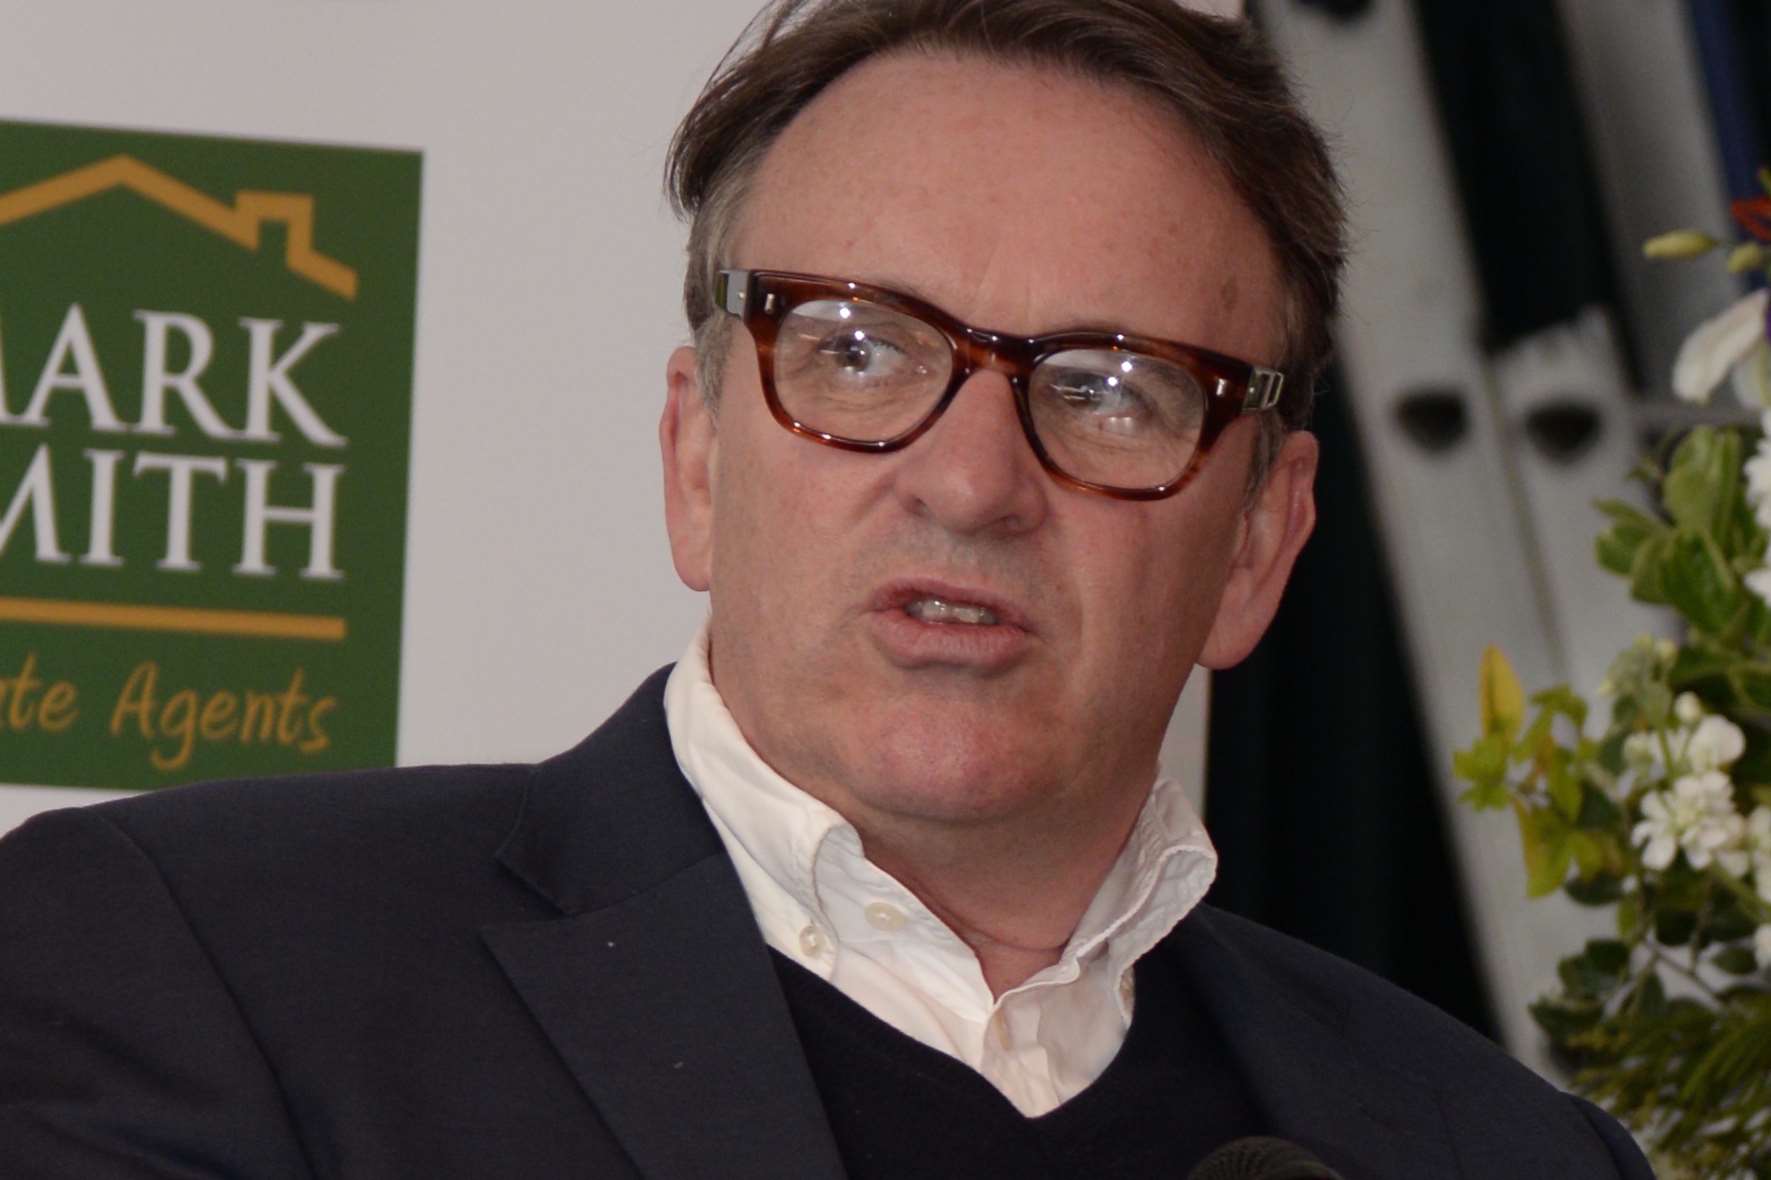 Chris Difford, songwriter and a founding member of Squeeze